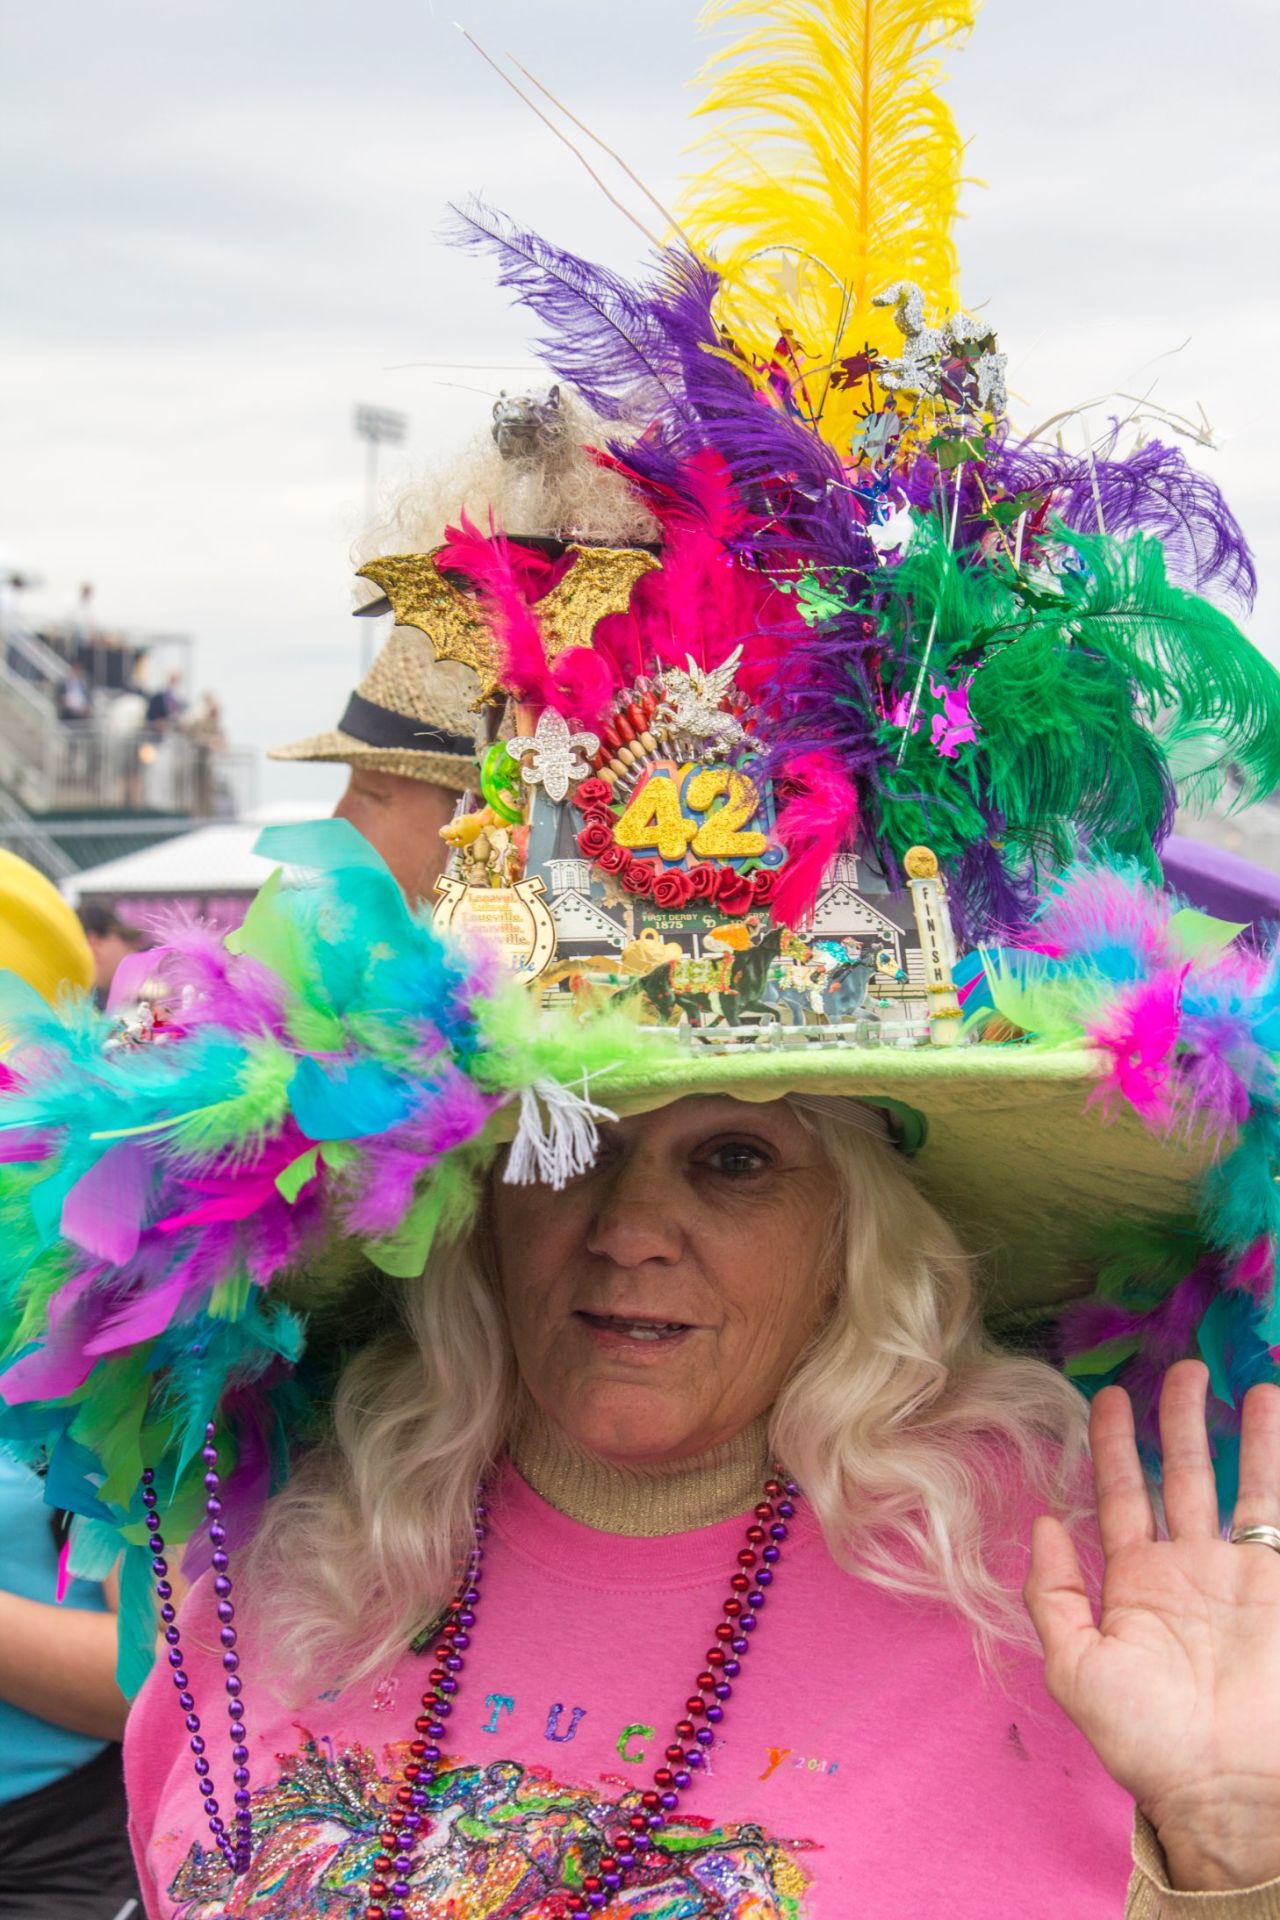 Feathers are a staple material worn on Derby hats, though usually not quite this many.